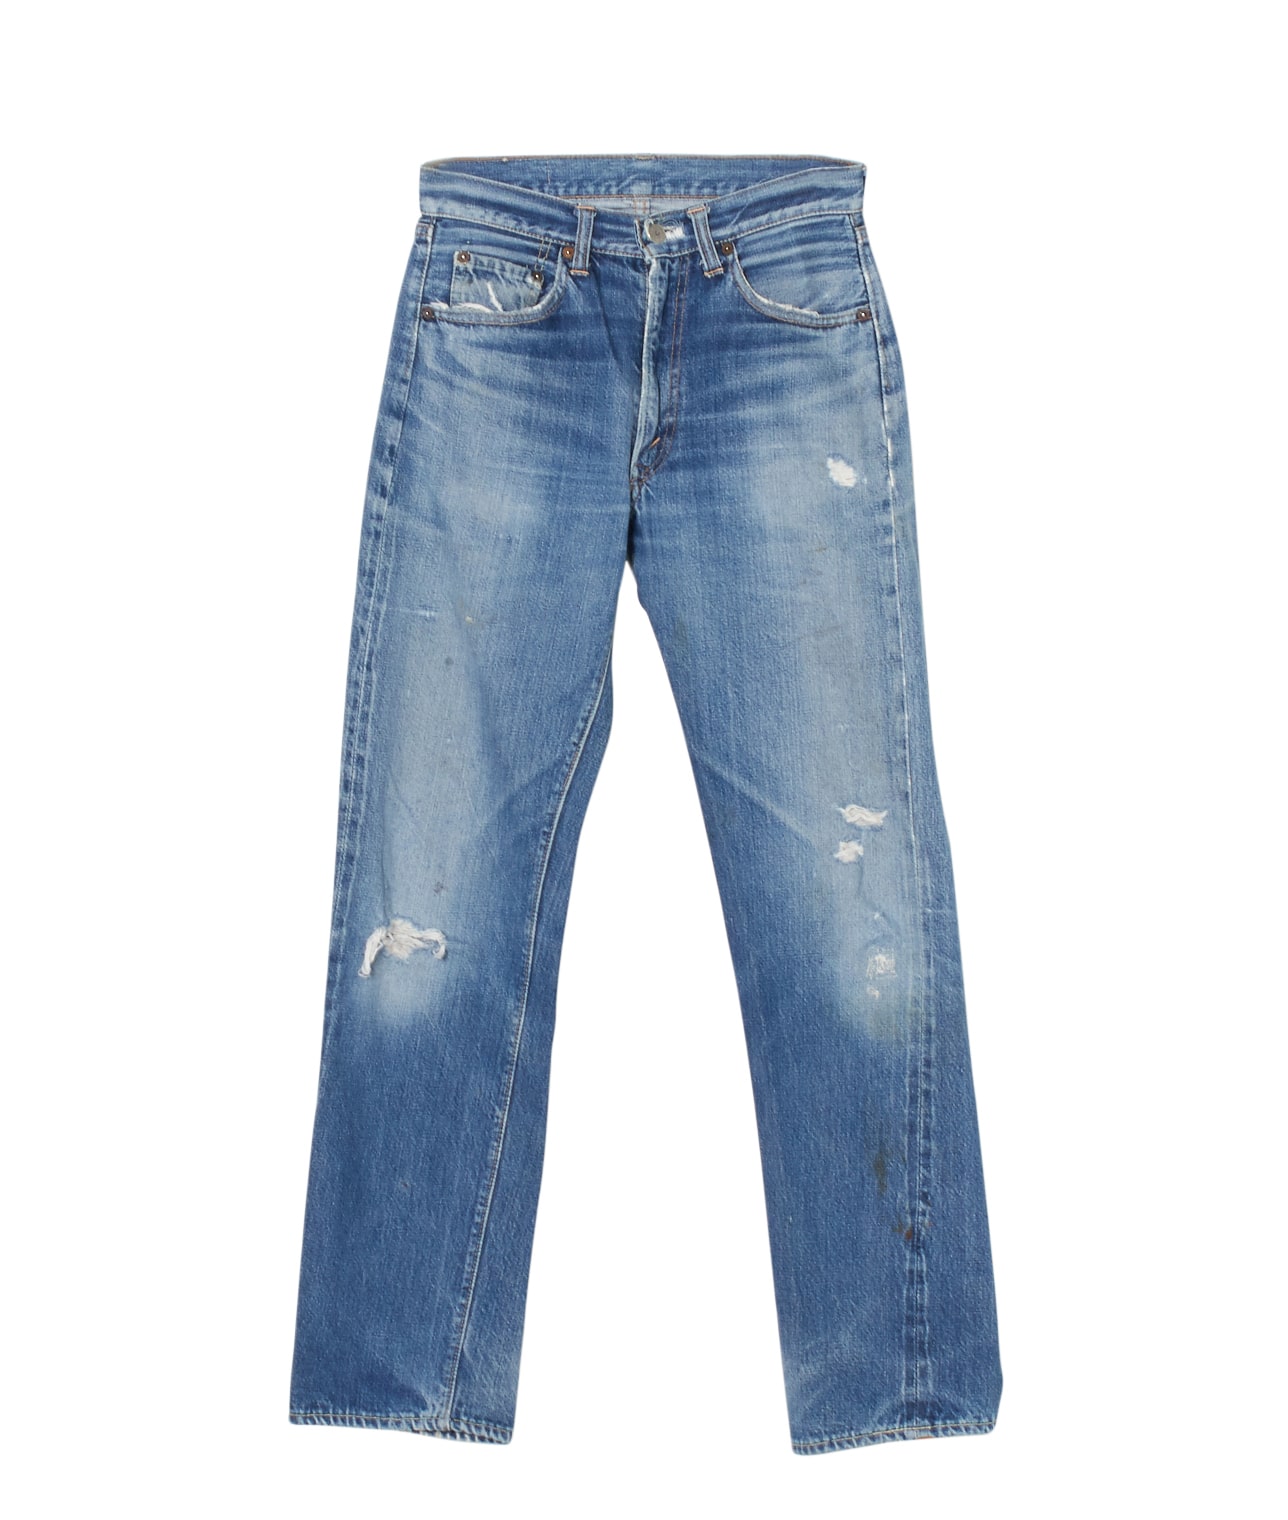 USED/LEVI'S 502 BIG E AS-IS 詳細画像 BLUE 1